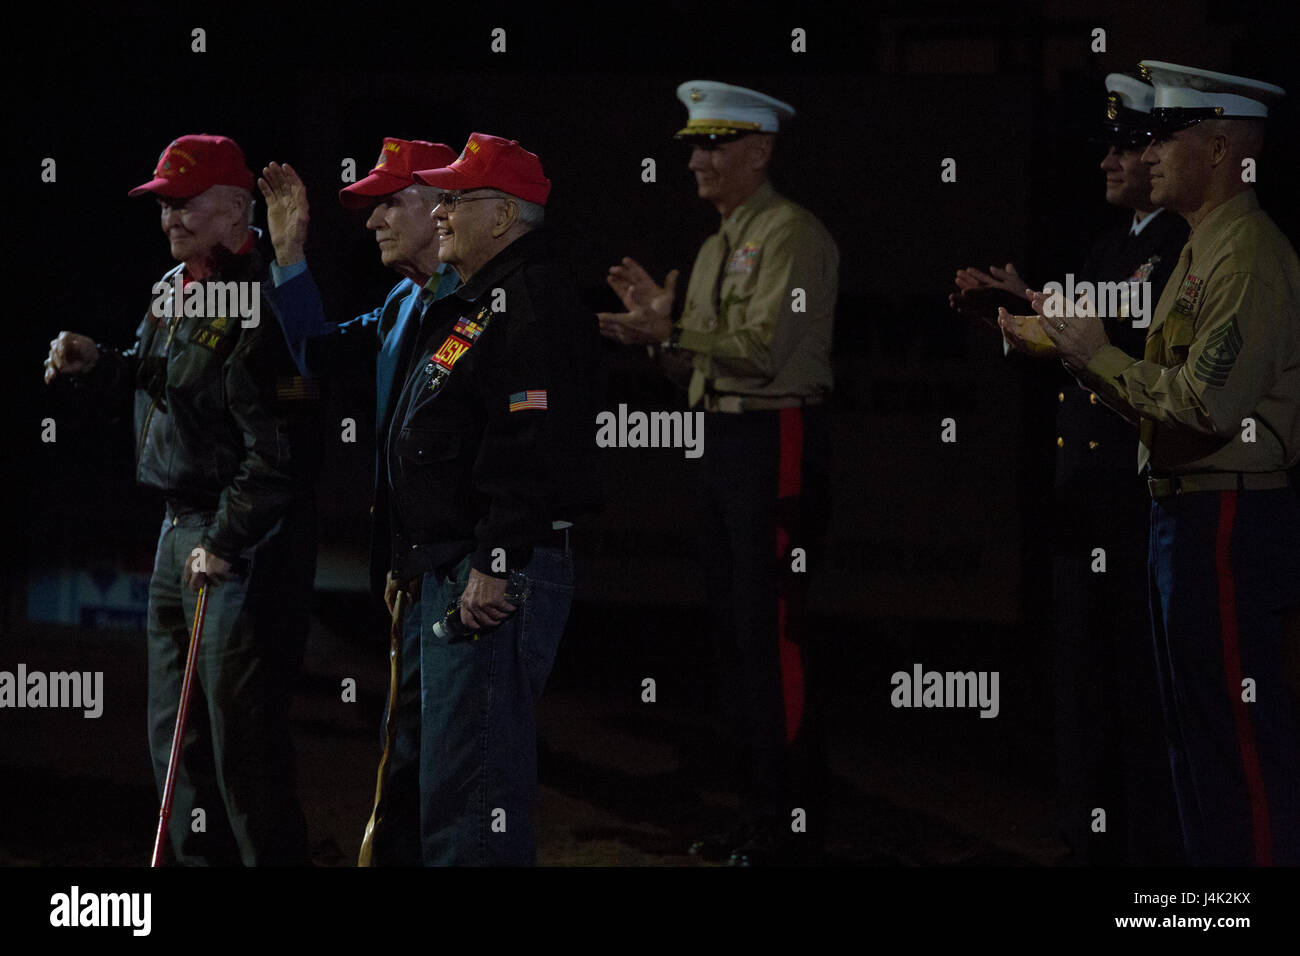 World War II veterans accept a standing ovation during the closing ceremony of the National Western Stock Show in Denver, Jan. 17, 2017, as leaders of Marine Forces Reserve show their support in appreciation for the sacrifices the men made for their country. The NWSS honored veterans to show their dedication to the military and to bring attention to the 100th anniversary of the Marine Corps Reserves. (U.S. Marine Corps photo by Lance Cpl. Dallas Johnson/Released) Stock Photo